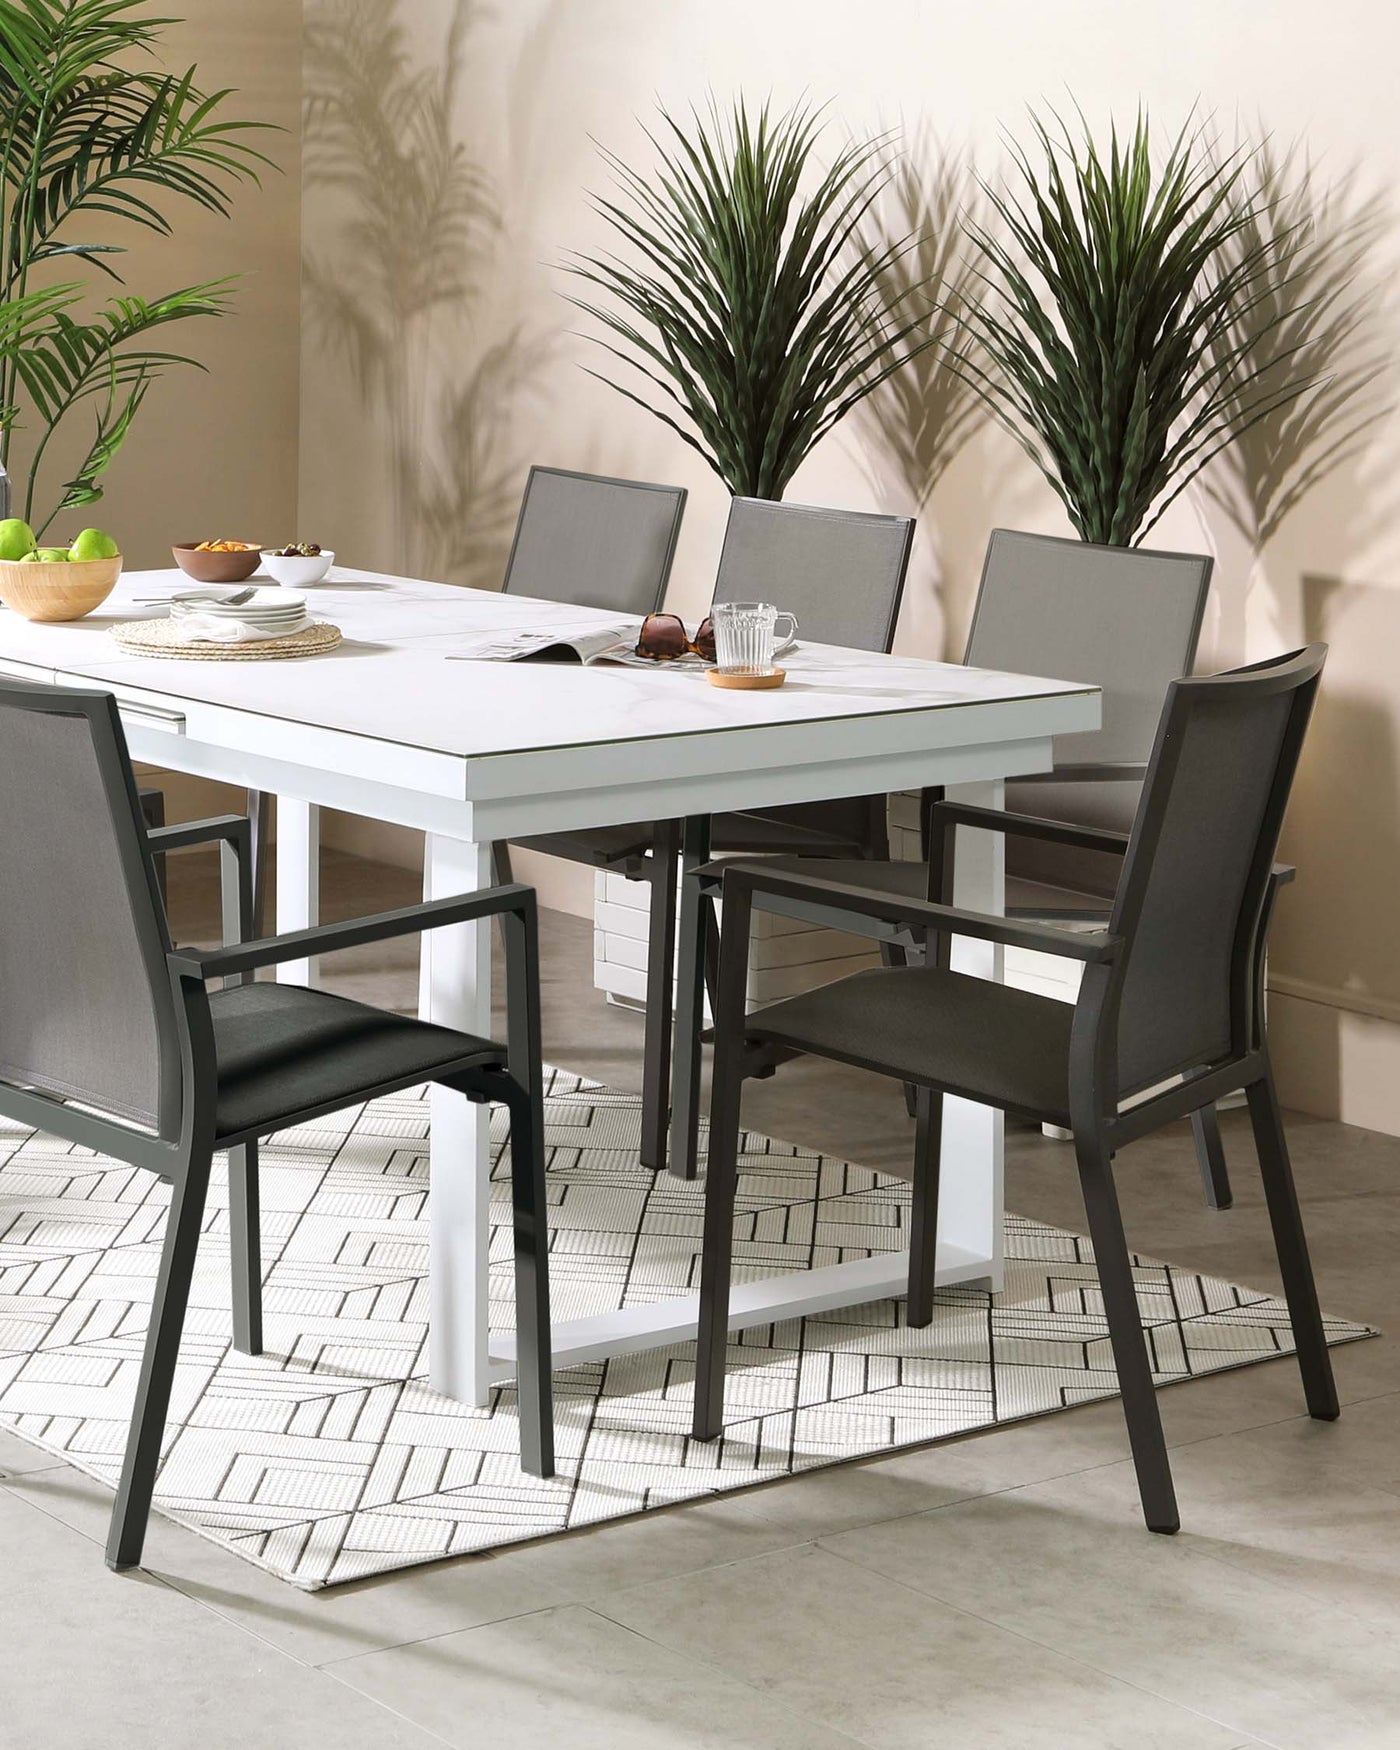 Modern dining set featuring a rectangular white table with a clean, minimalistic design and black metal legs. Accompanied by four contemporary chairs with black frames and grey fabric seat and backrest, complementing the table's sleek aesthetic. Ideal for a sophisticated and stylish dining room.